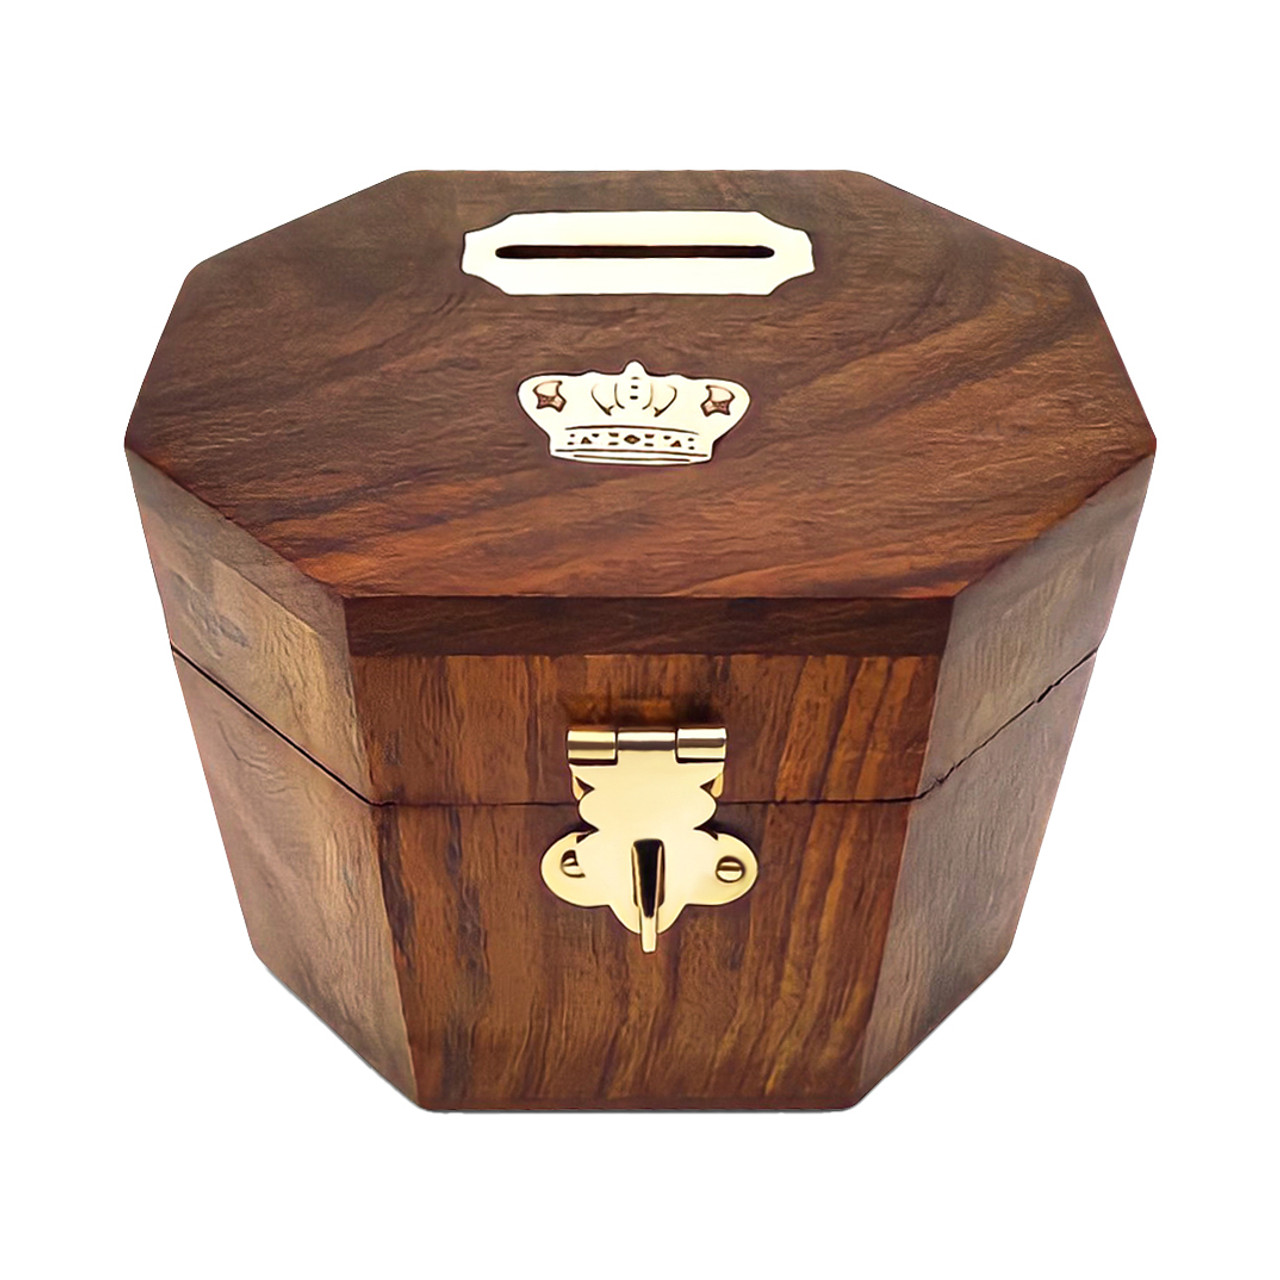 Vintiquewise QI004394 Wooden Decorative Coin Bank Money Saving Box Secured with Lockable Latch